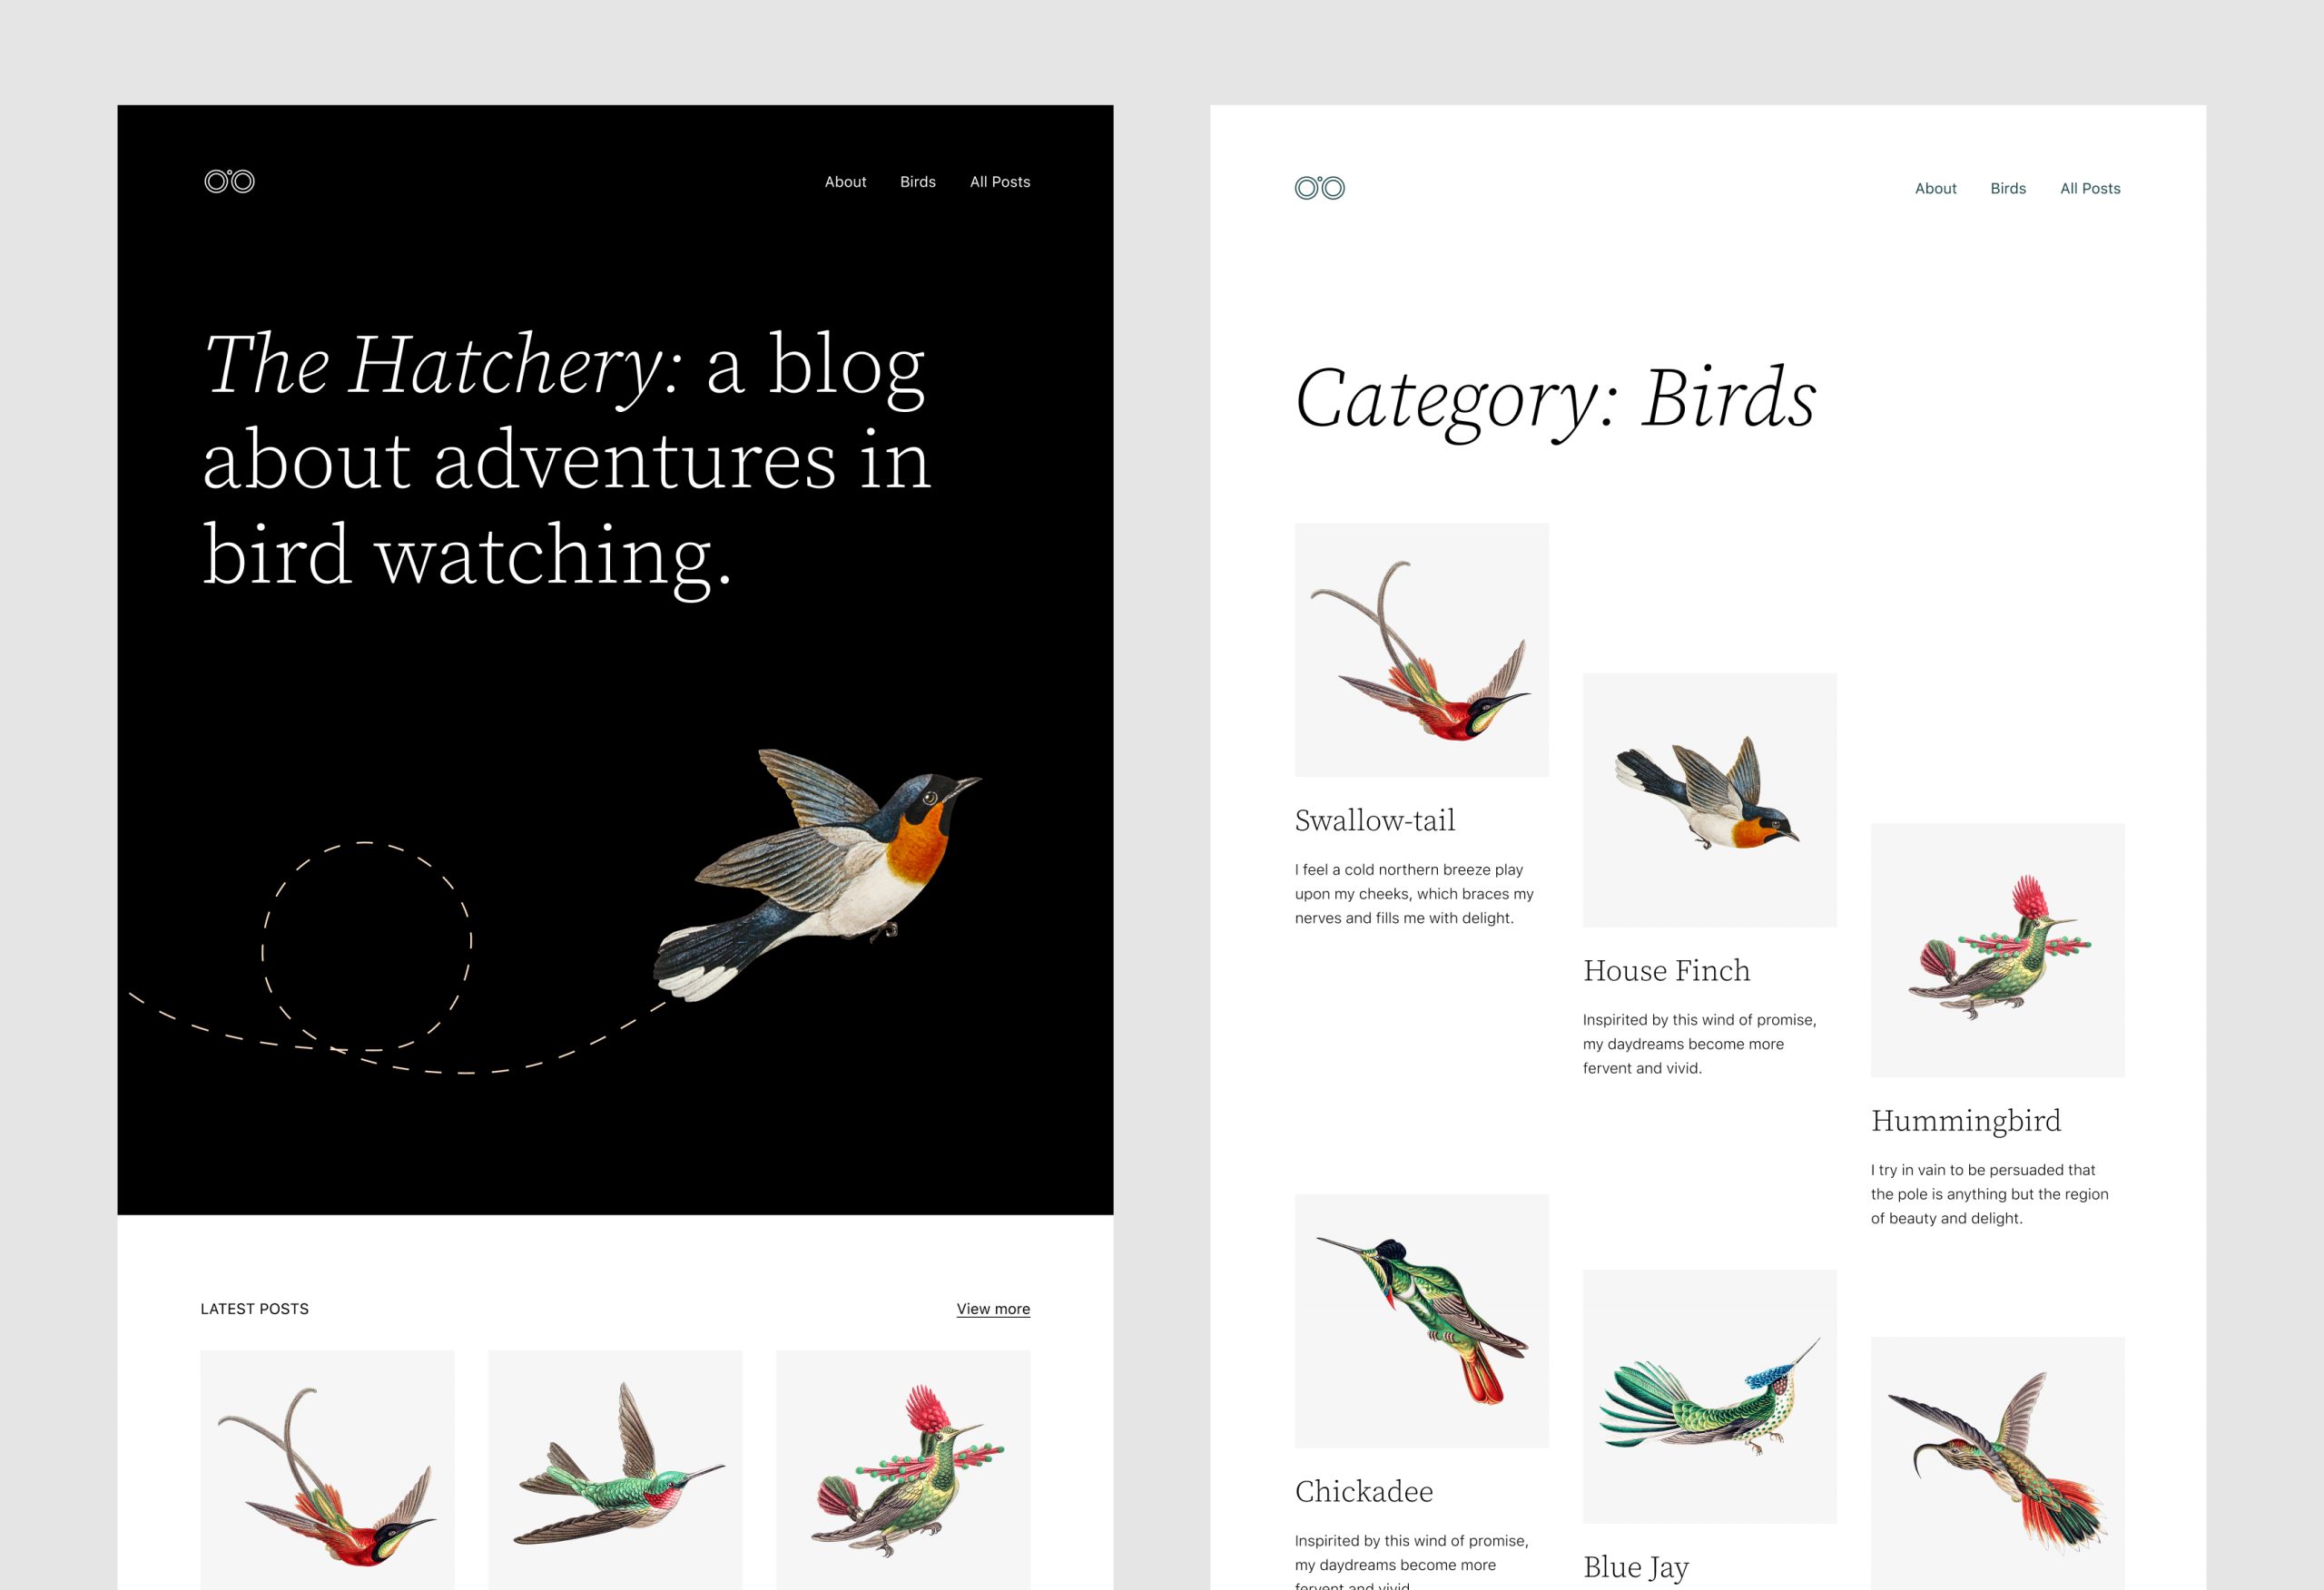 Homepage of Twenty Twenty-Two on the left with a large intro section and latest posts grid below. On the right, is a category archive with offset grid posts.